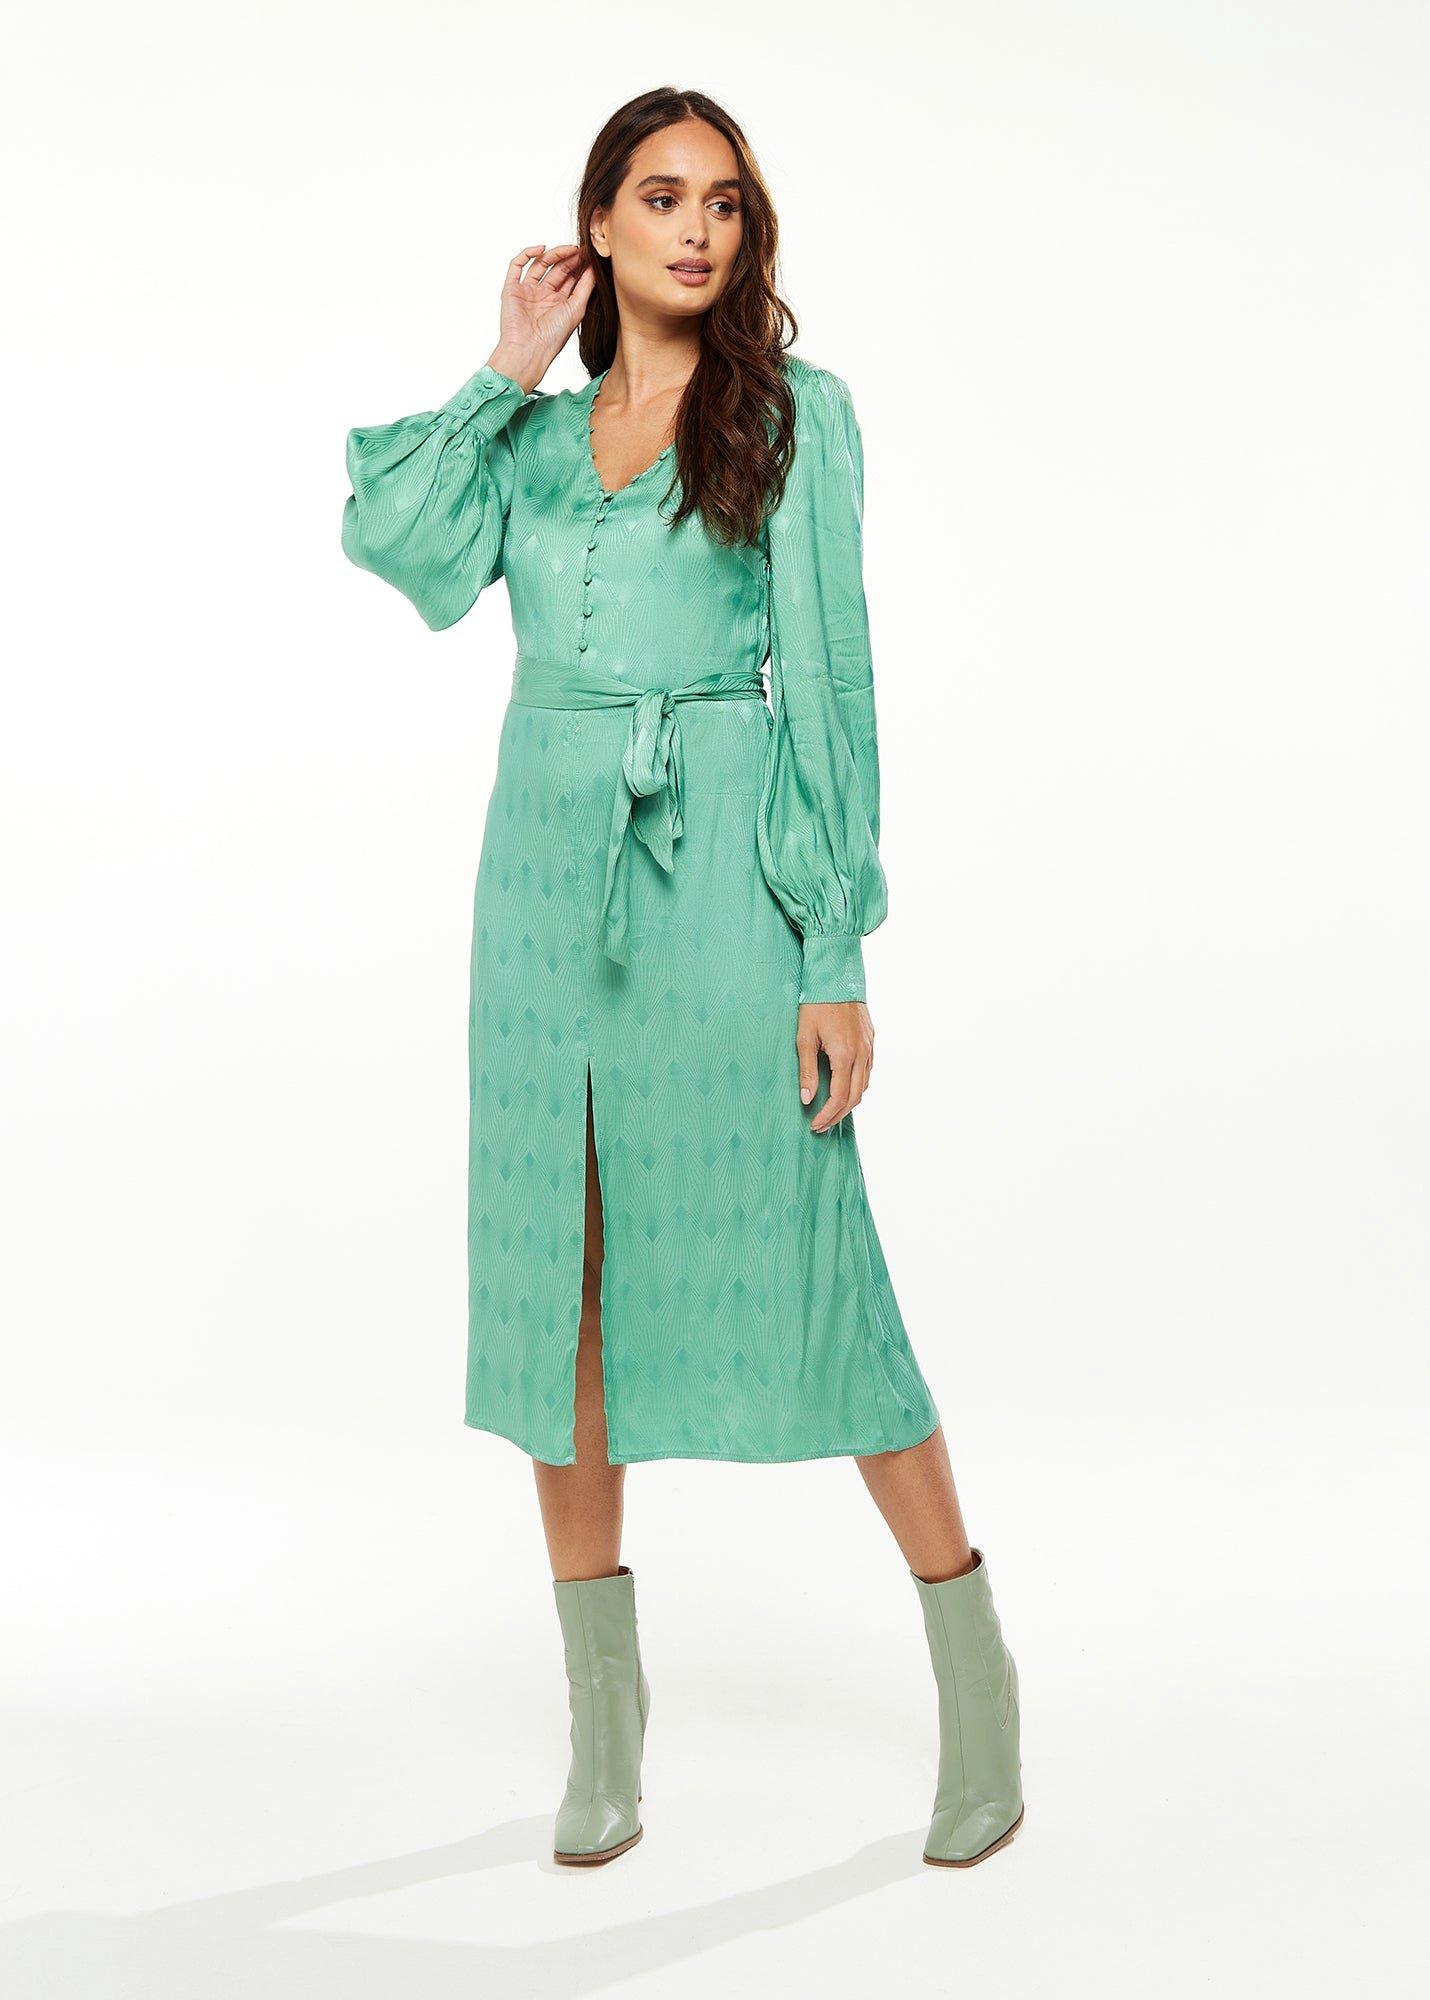 70s Style Jacquard Dress In Mint with Slit